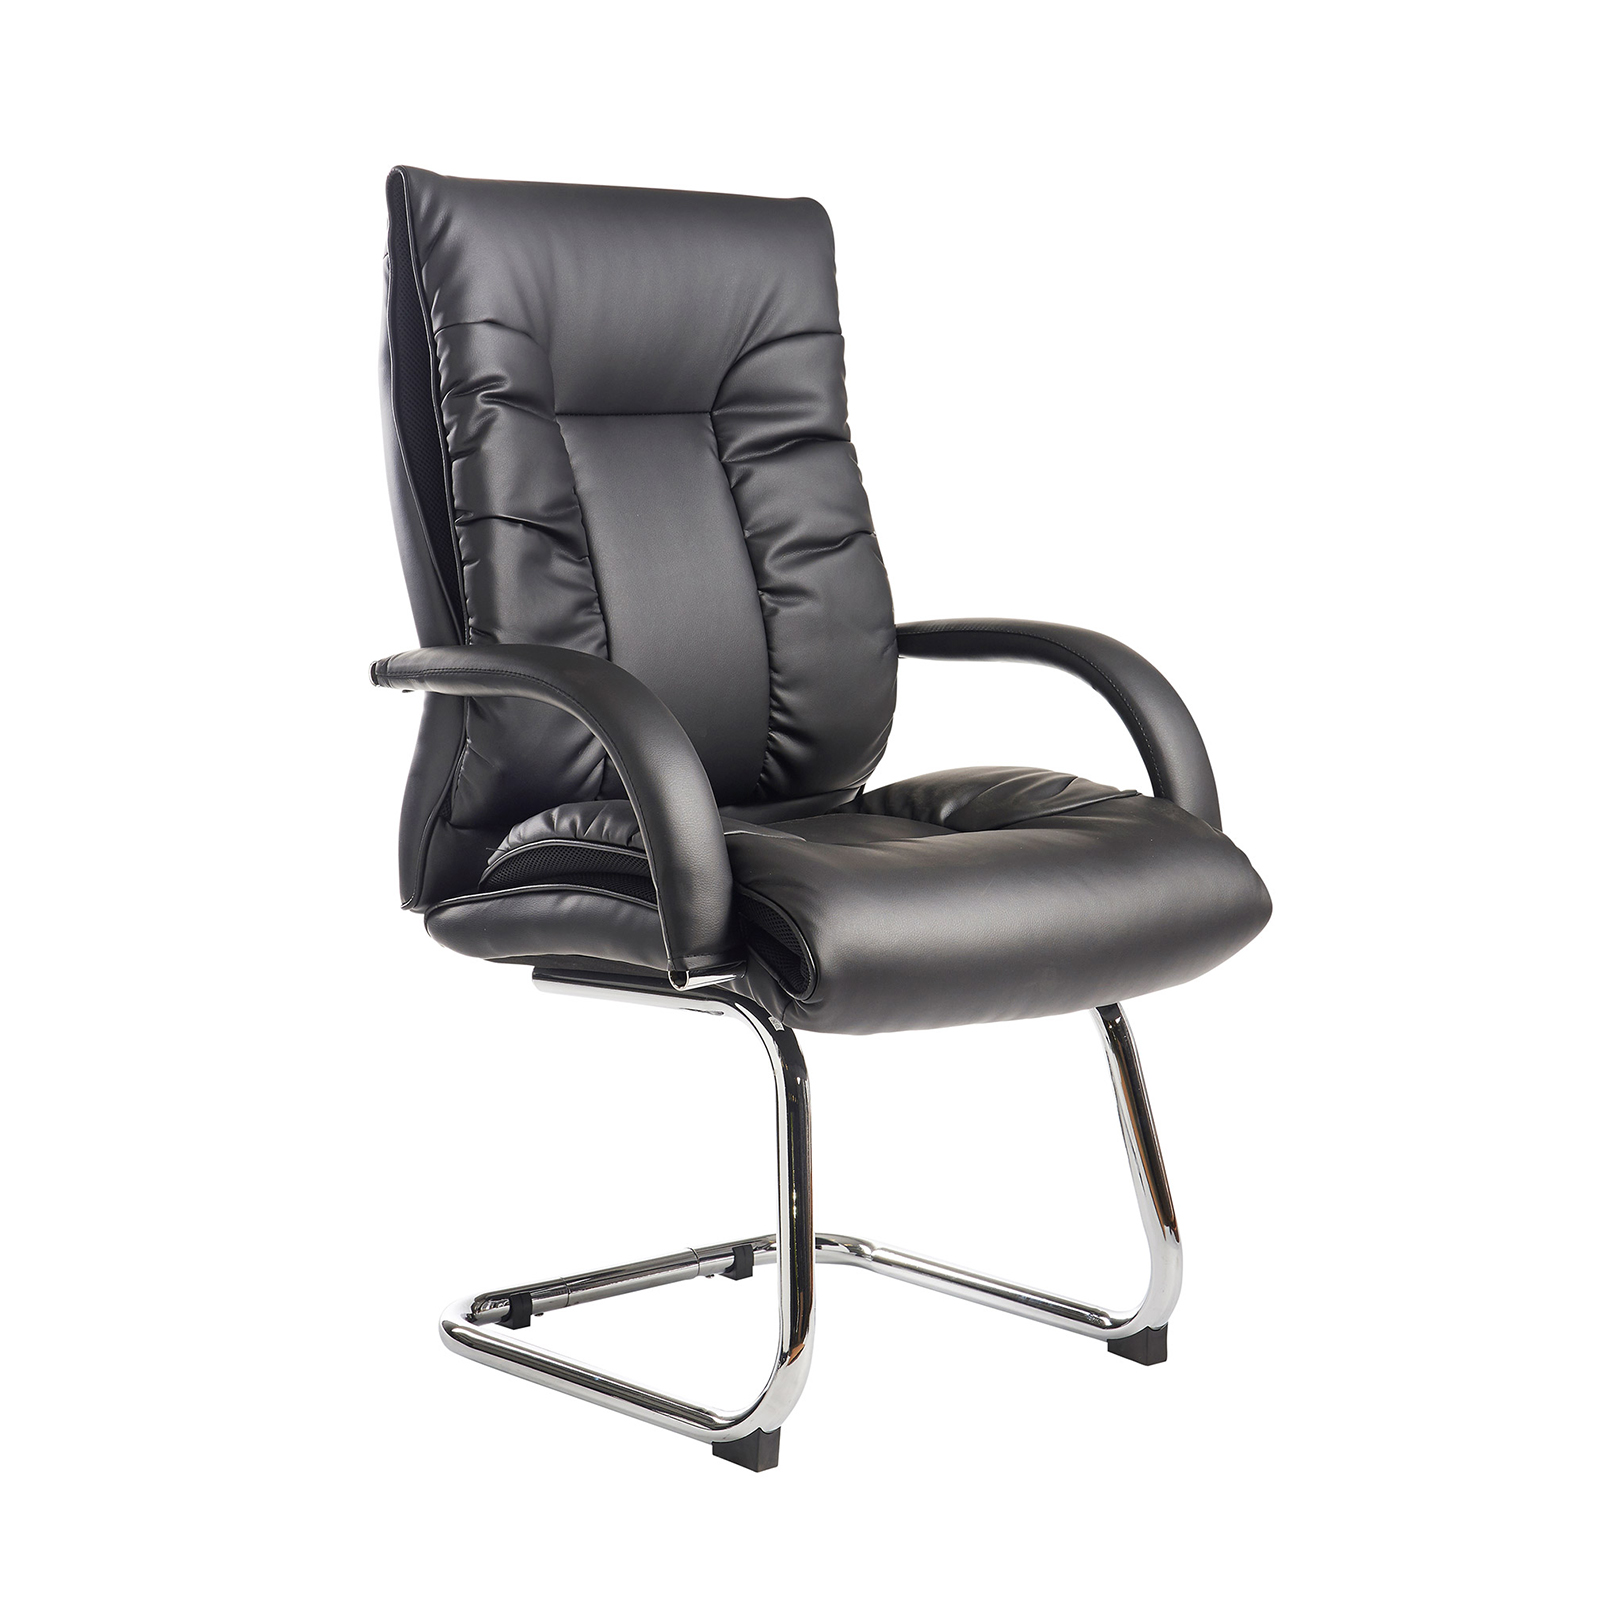 Derby High Back Visitors Chair - Black Faux Leather